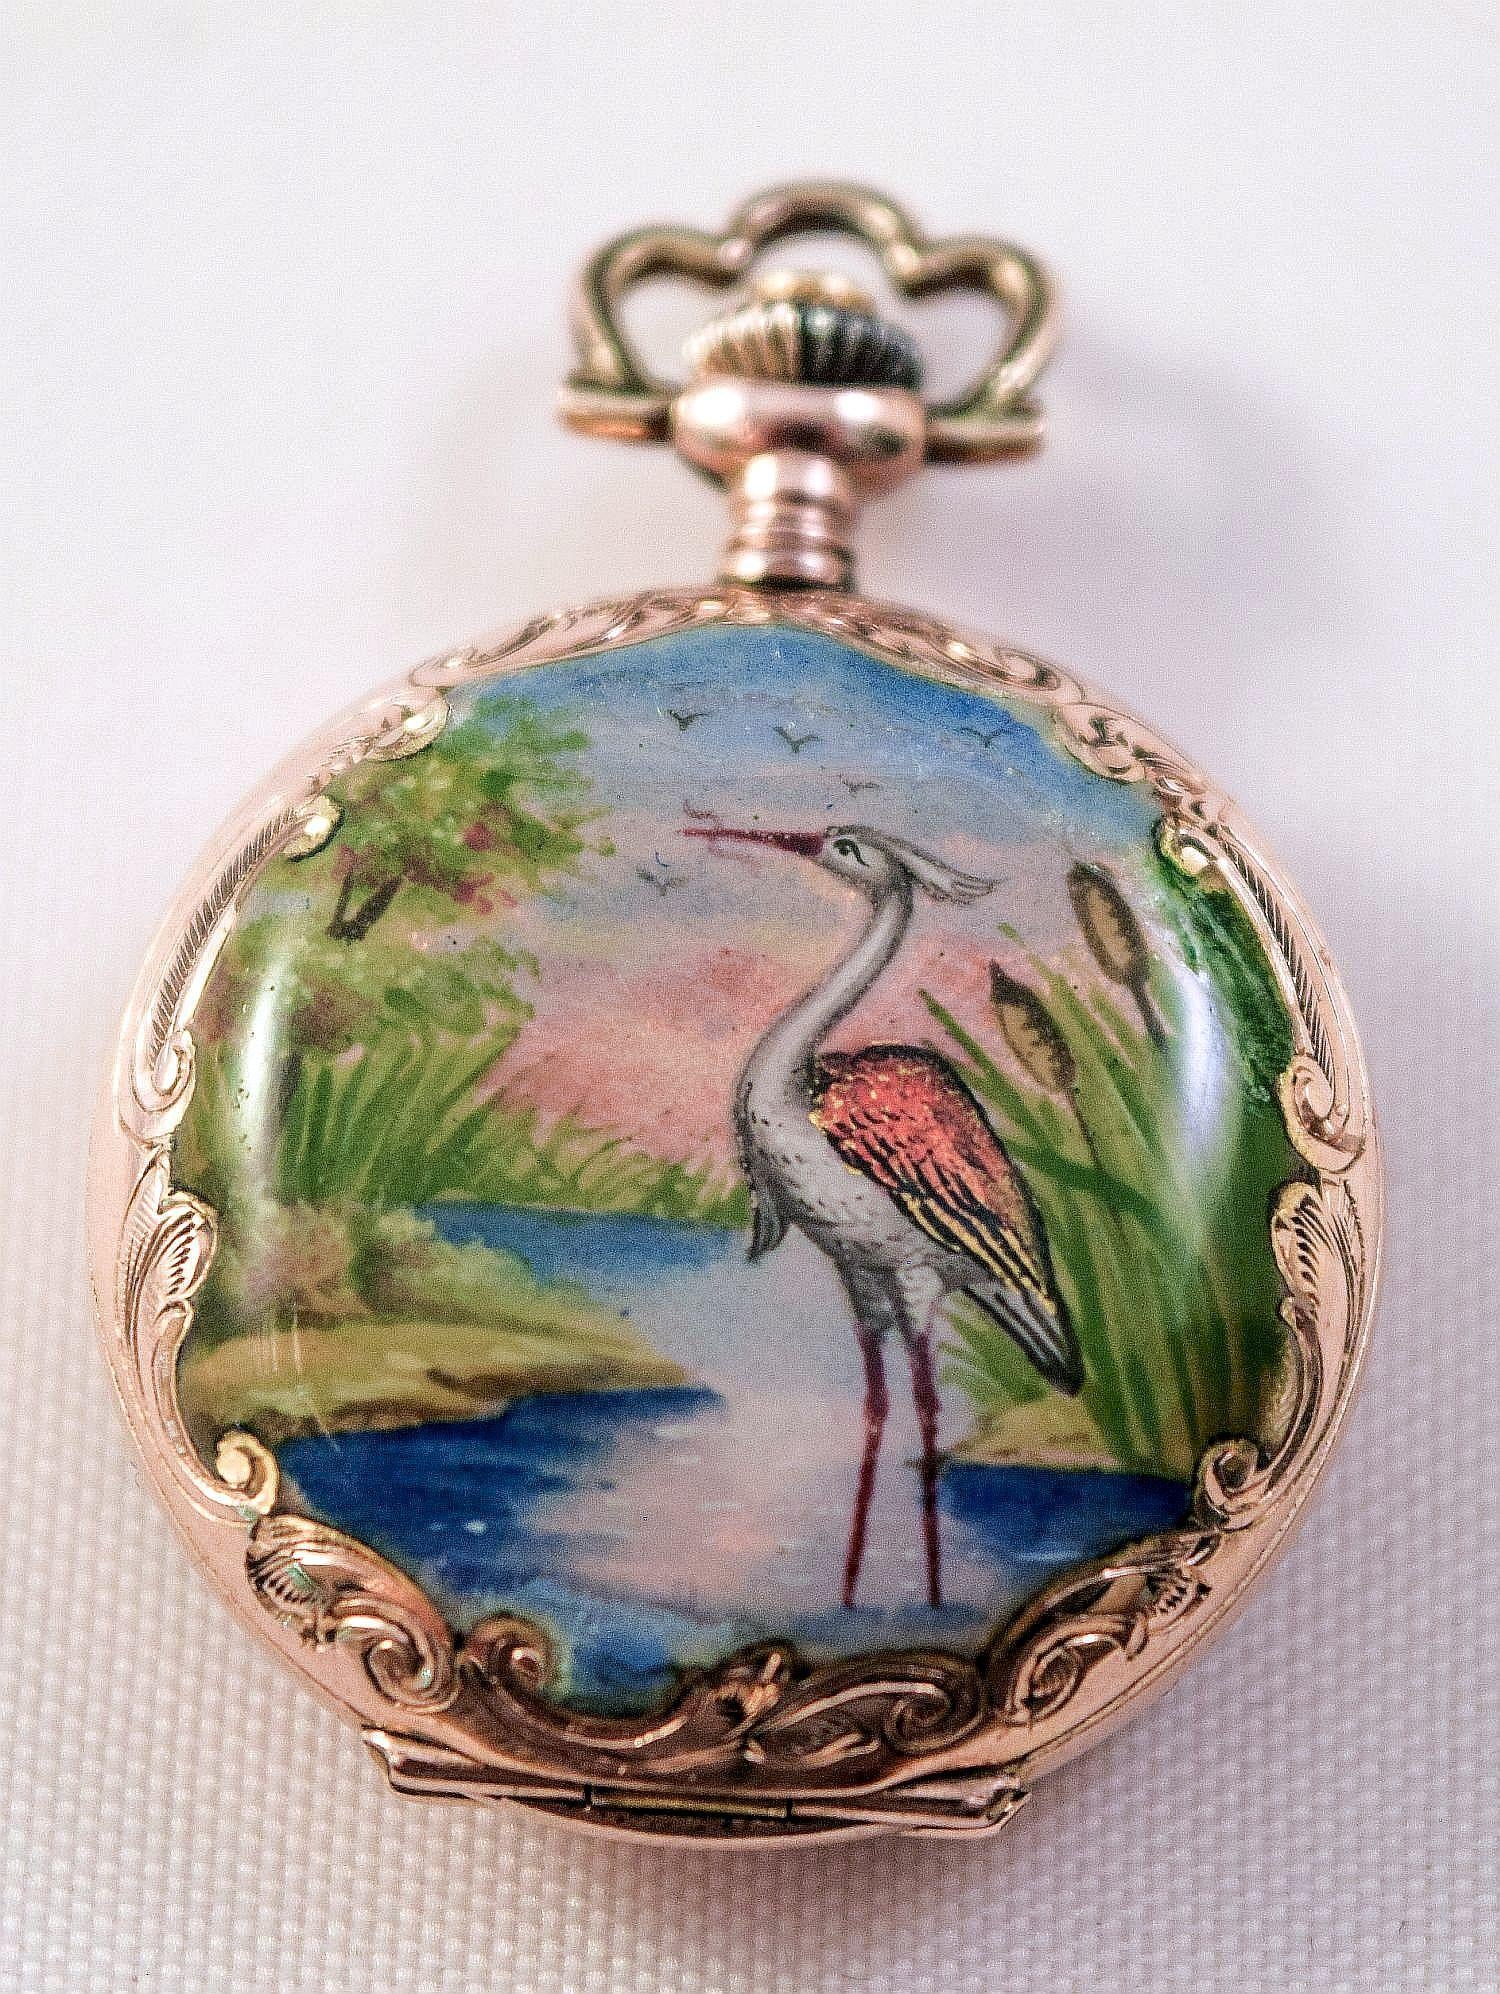 Women's or Men's Enamel Pocket Watch Hunter case tropical landscapes and Heron amazing condition